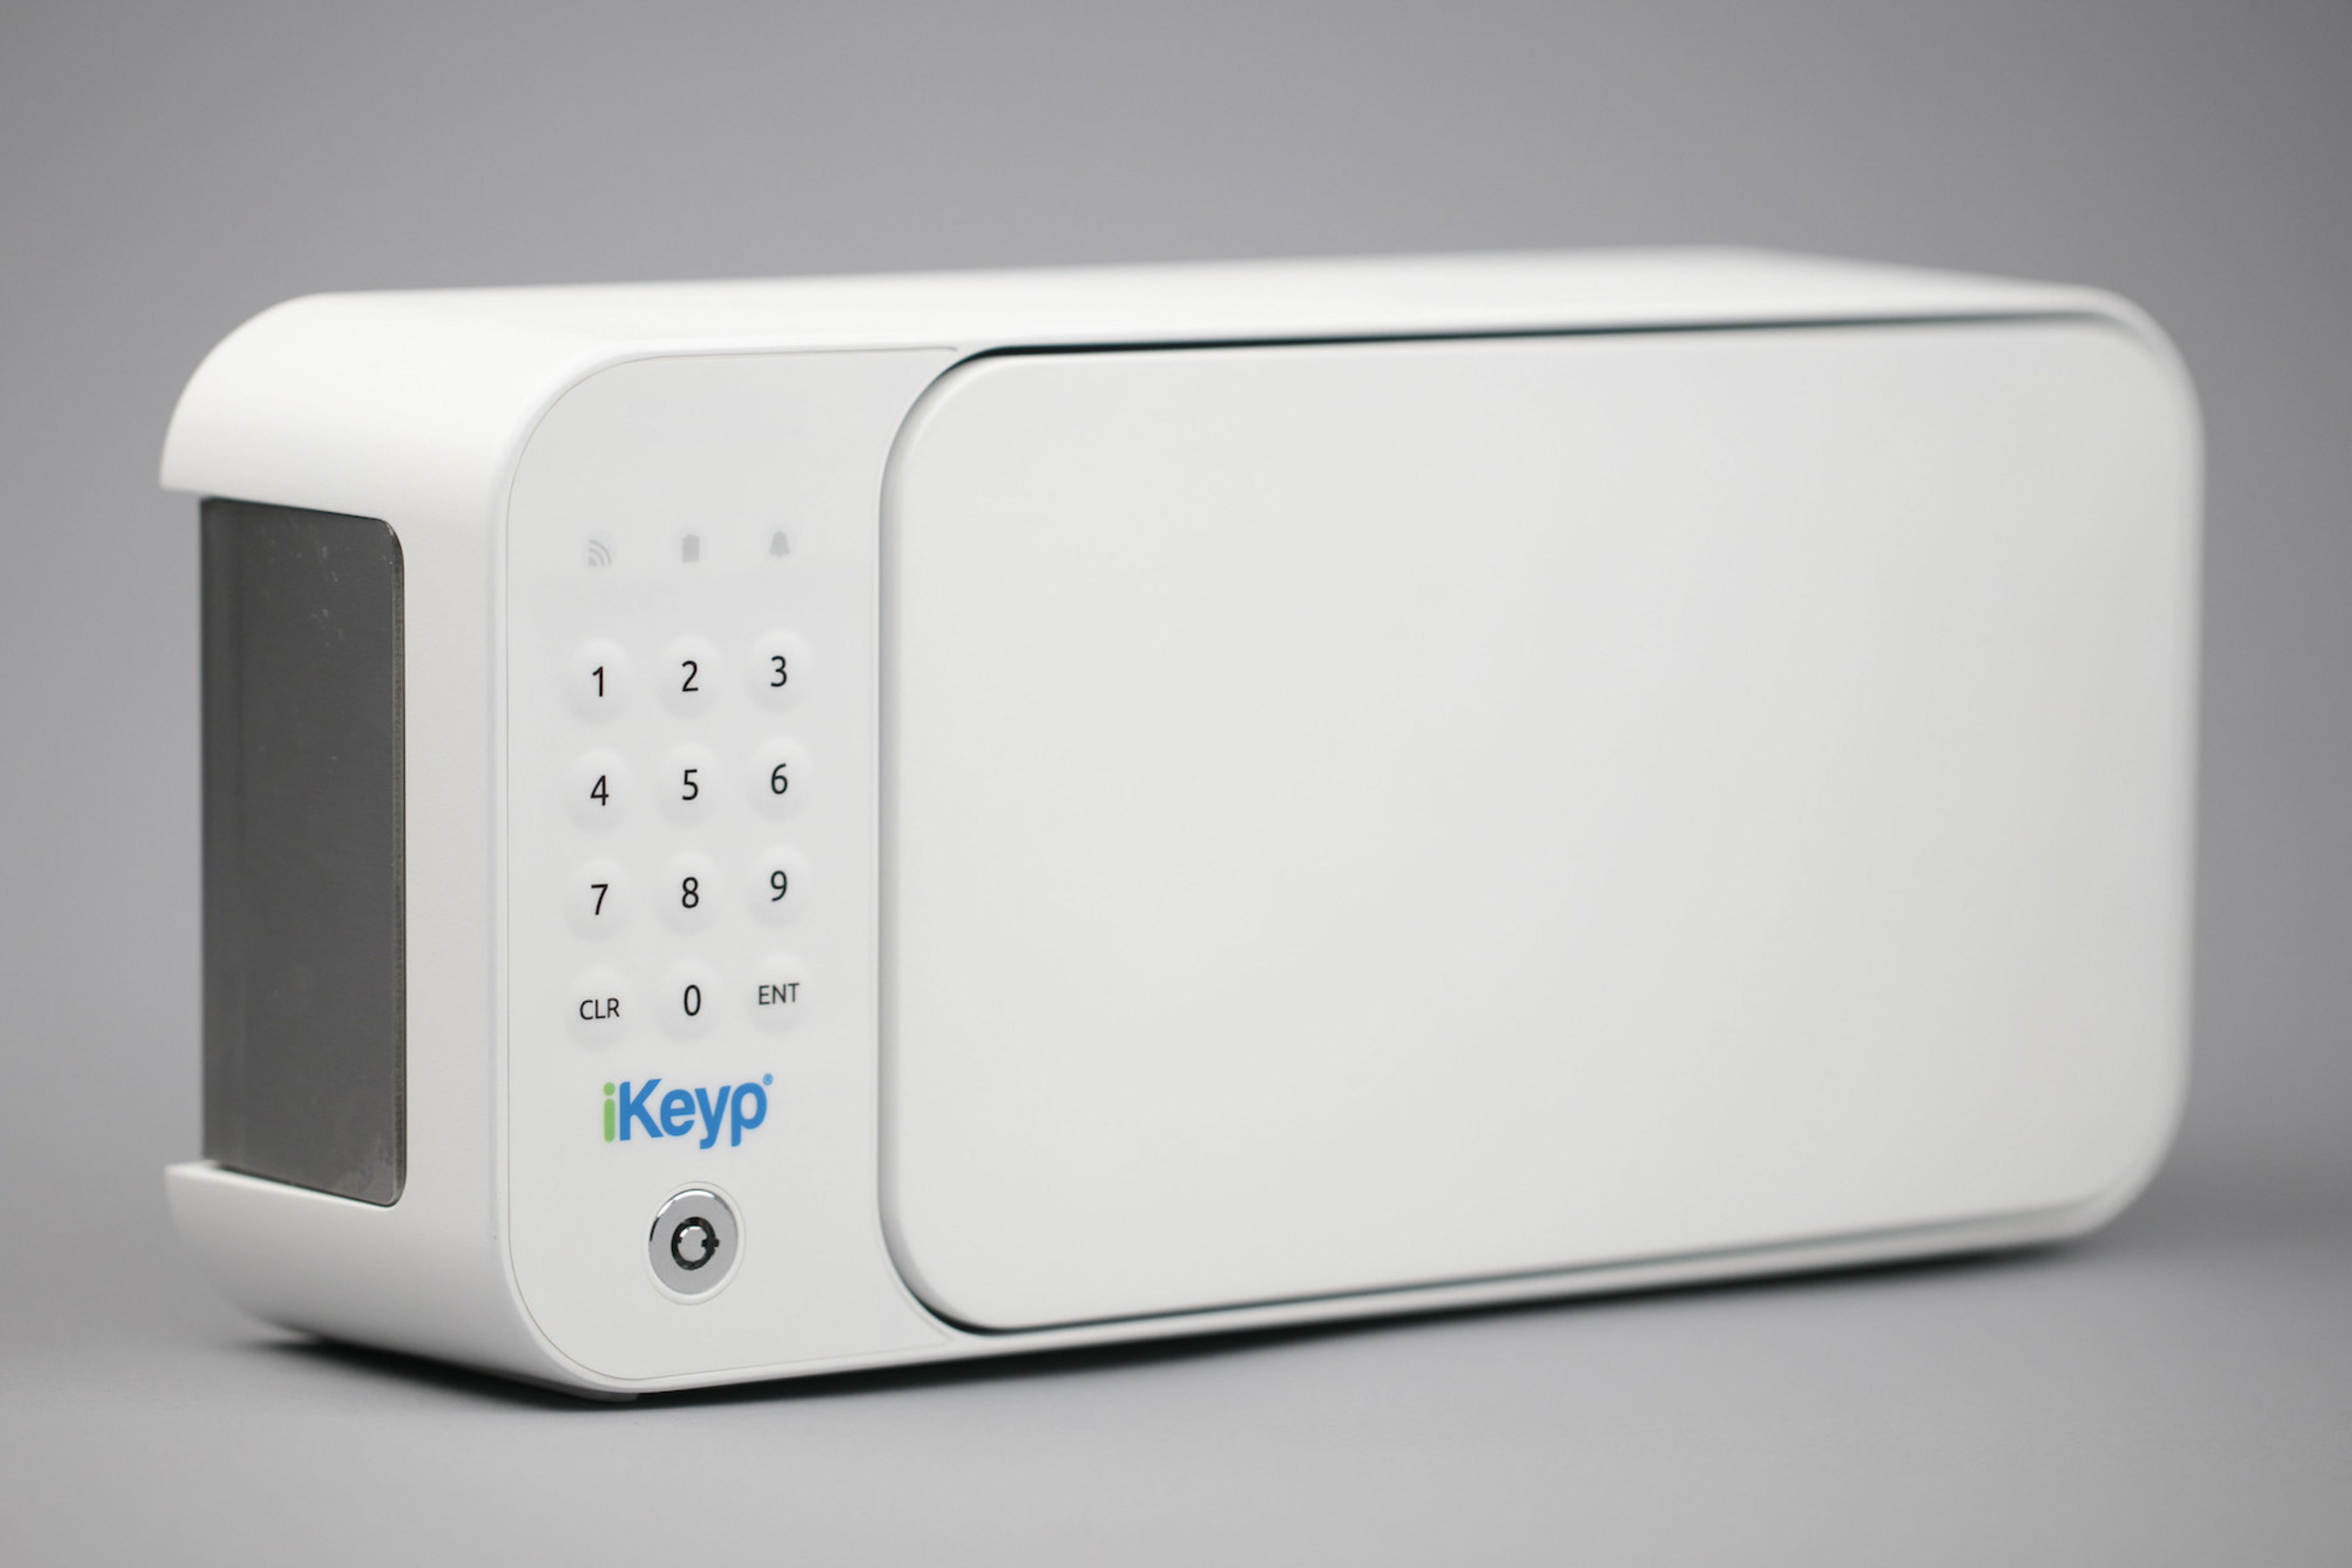 Designed to disrupt the cycle of prescription drug theft and abuse, the iKeyp will launch this fall on Indiegogo as the first Internet of Things integrated personal safe.